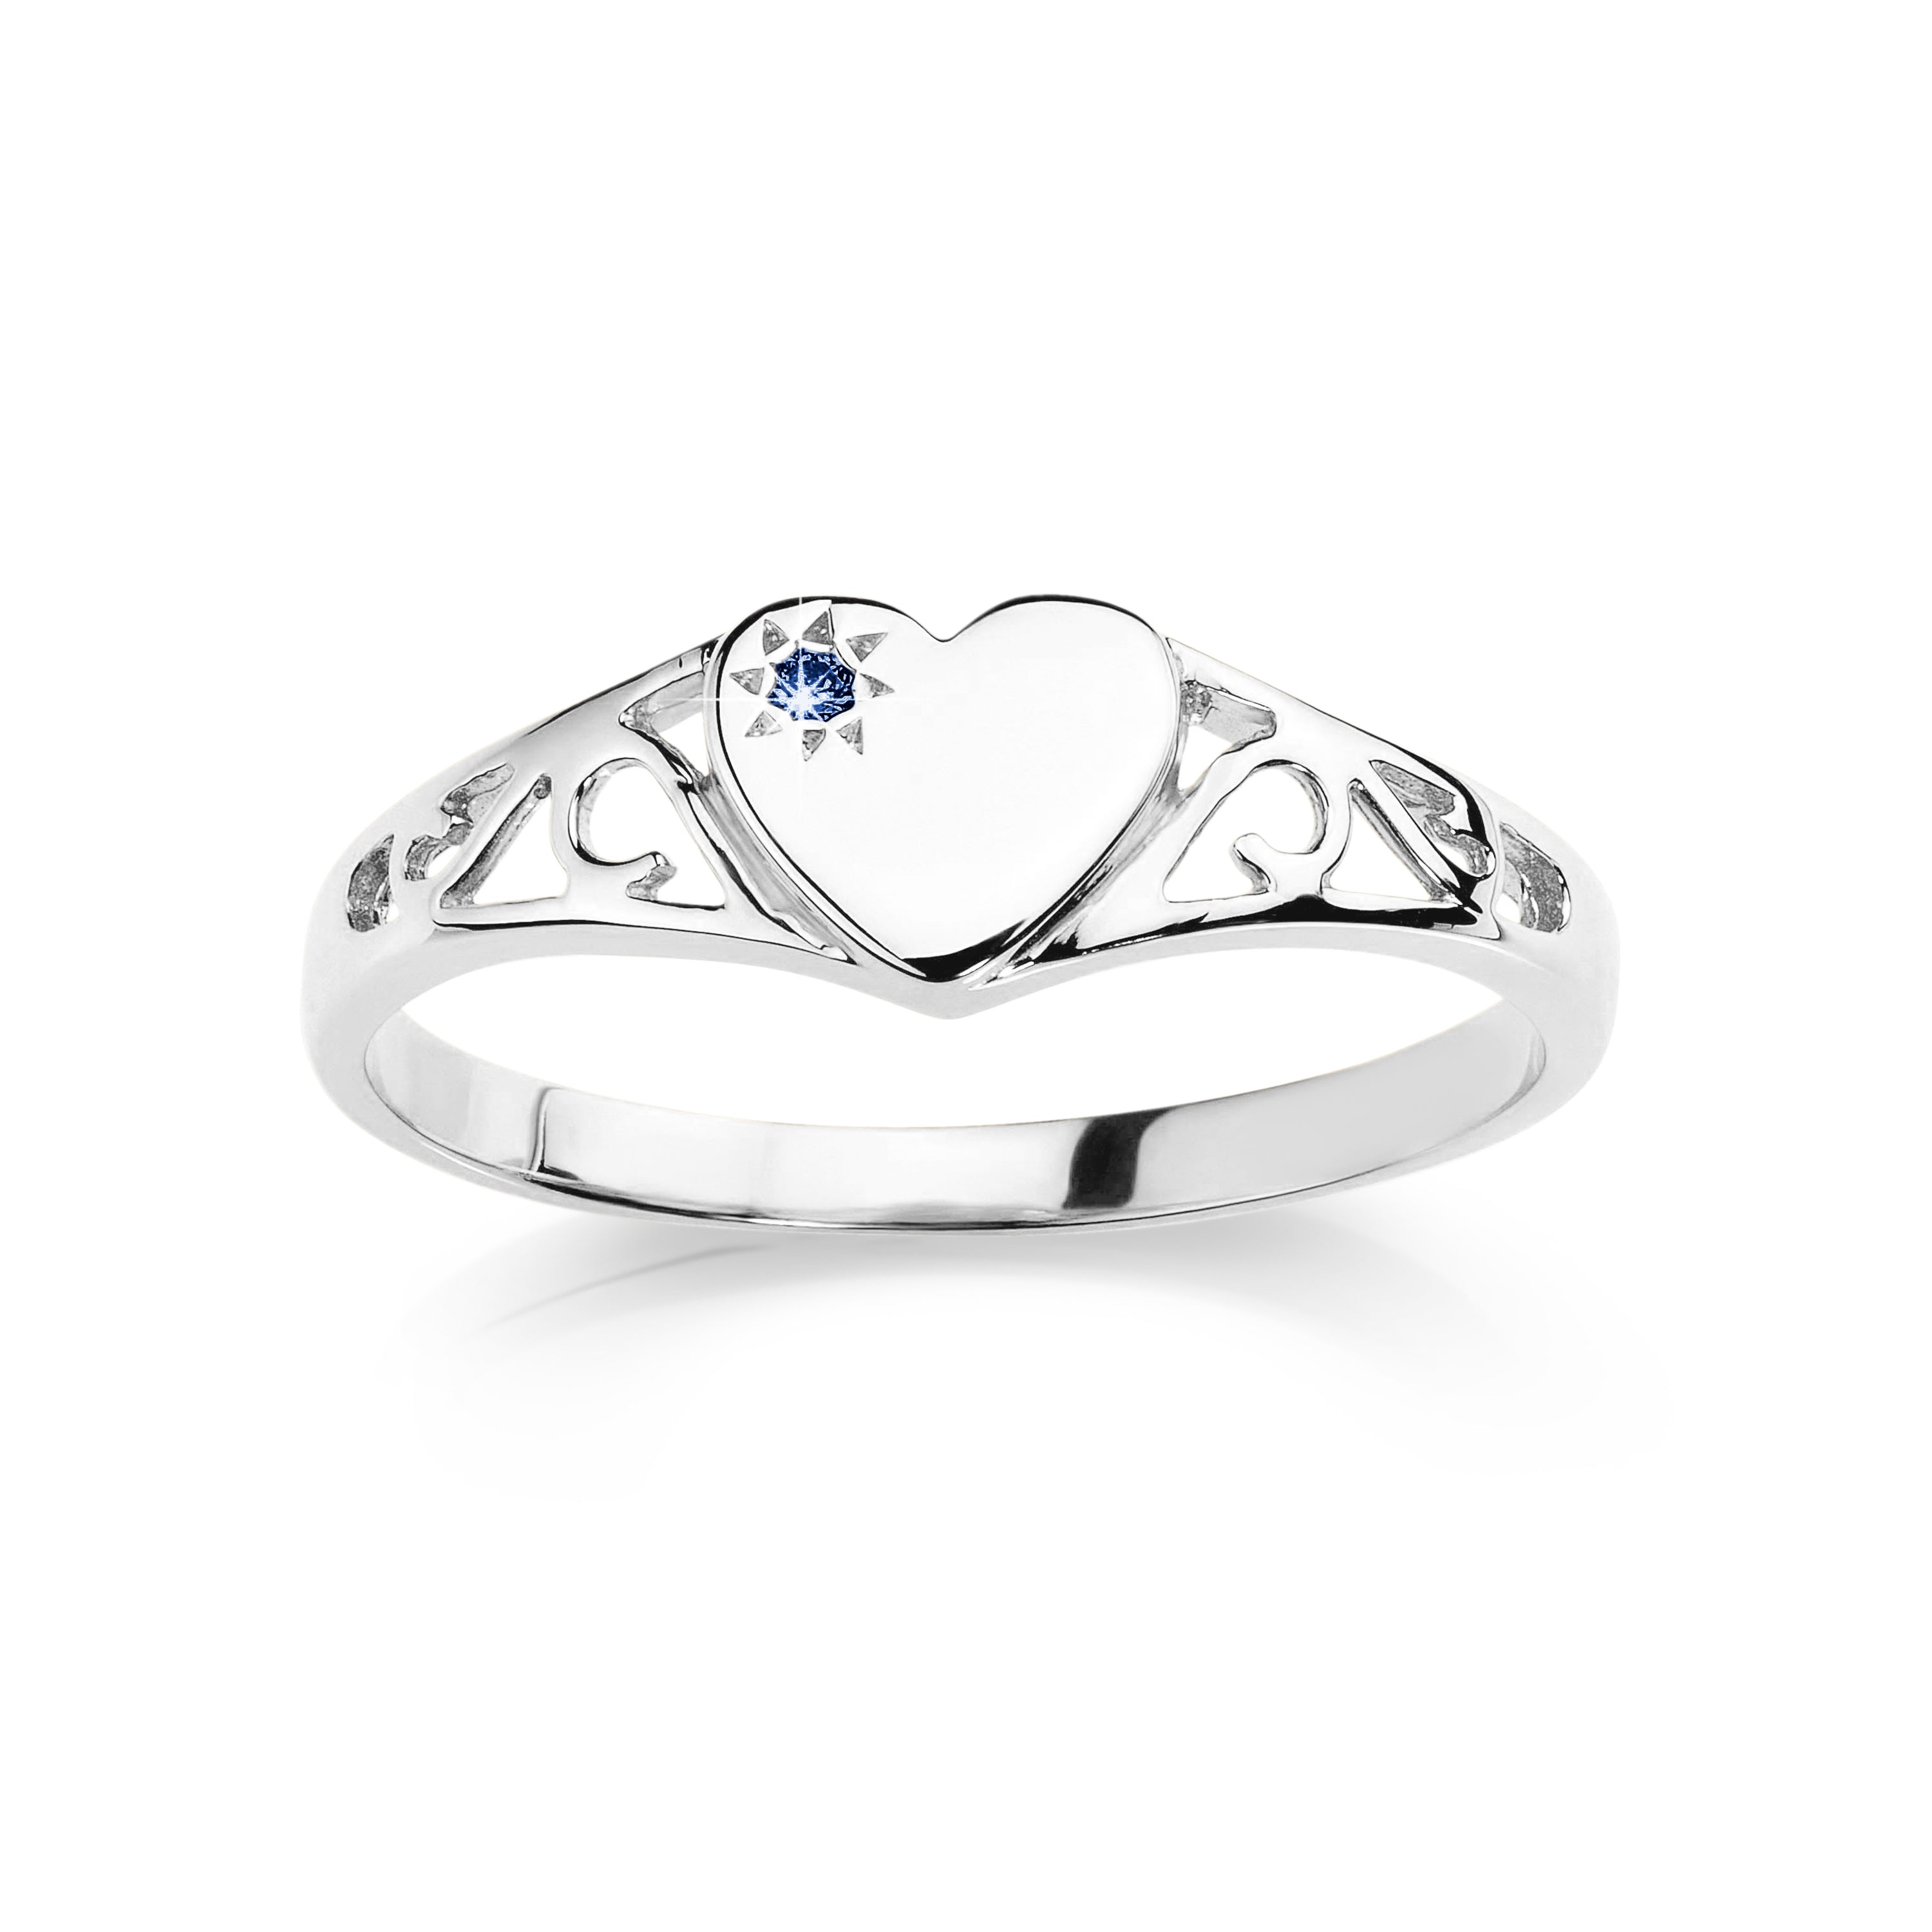 Silver sapphire signet ring